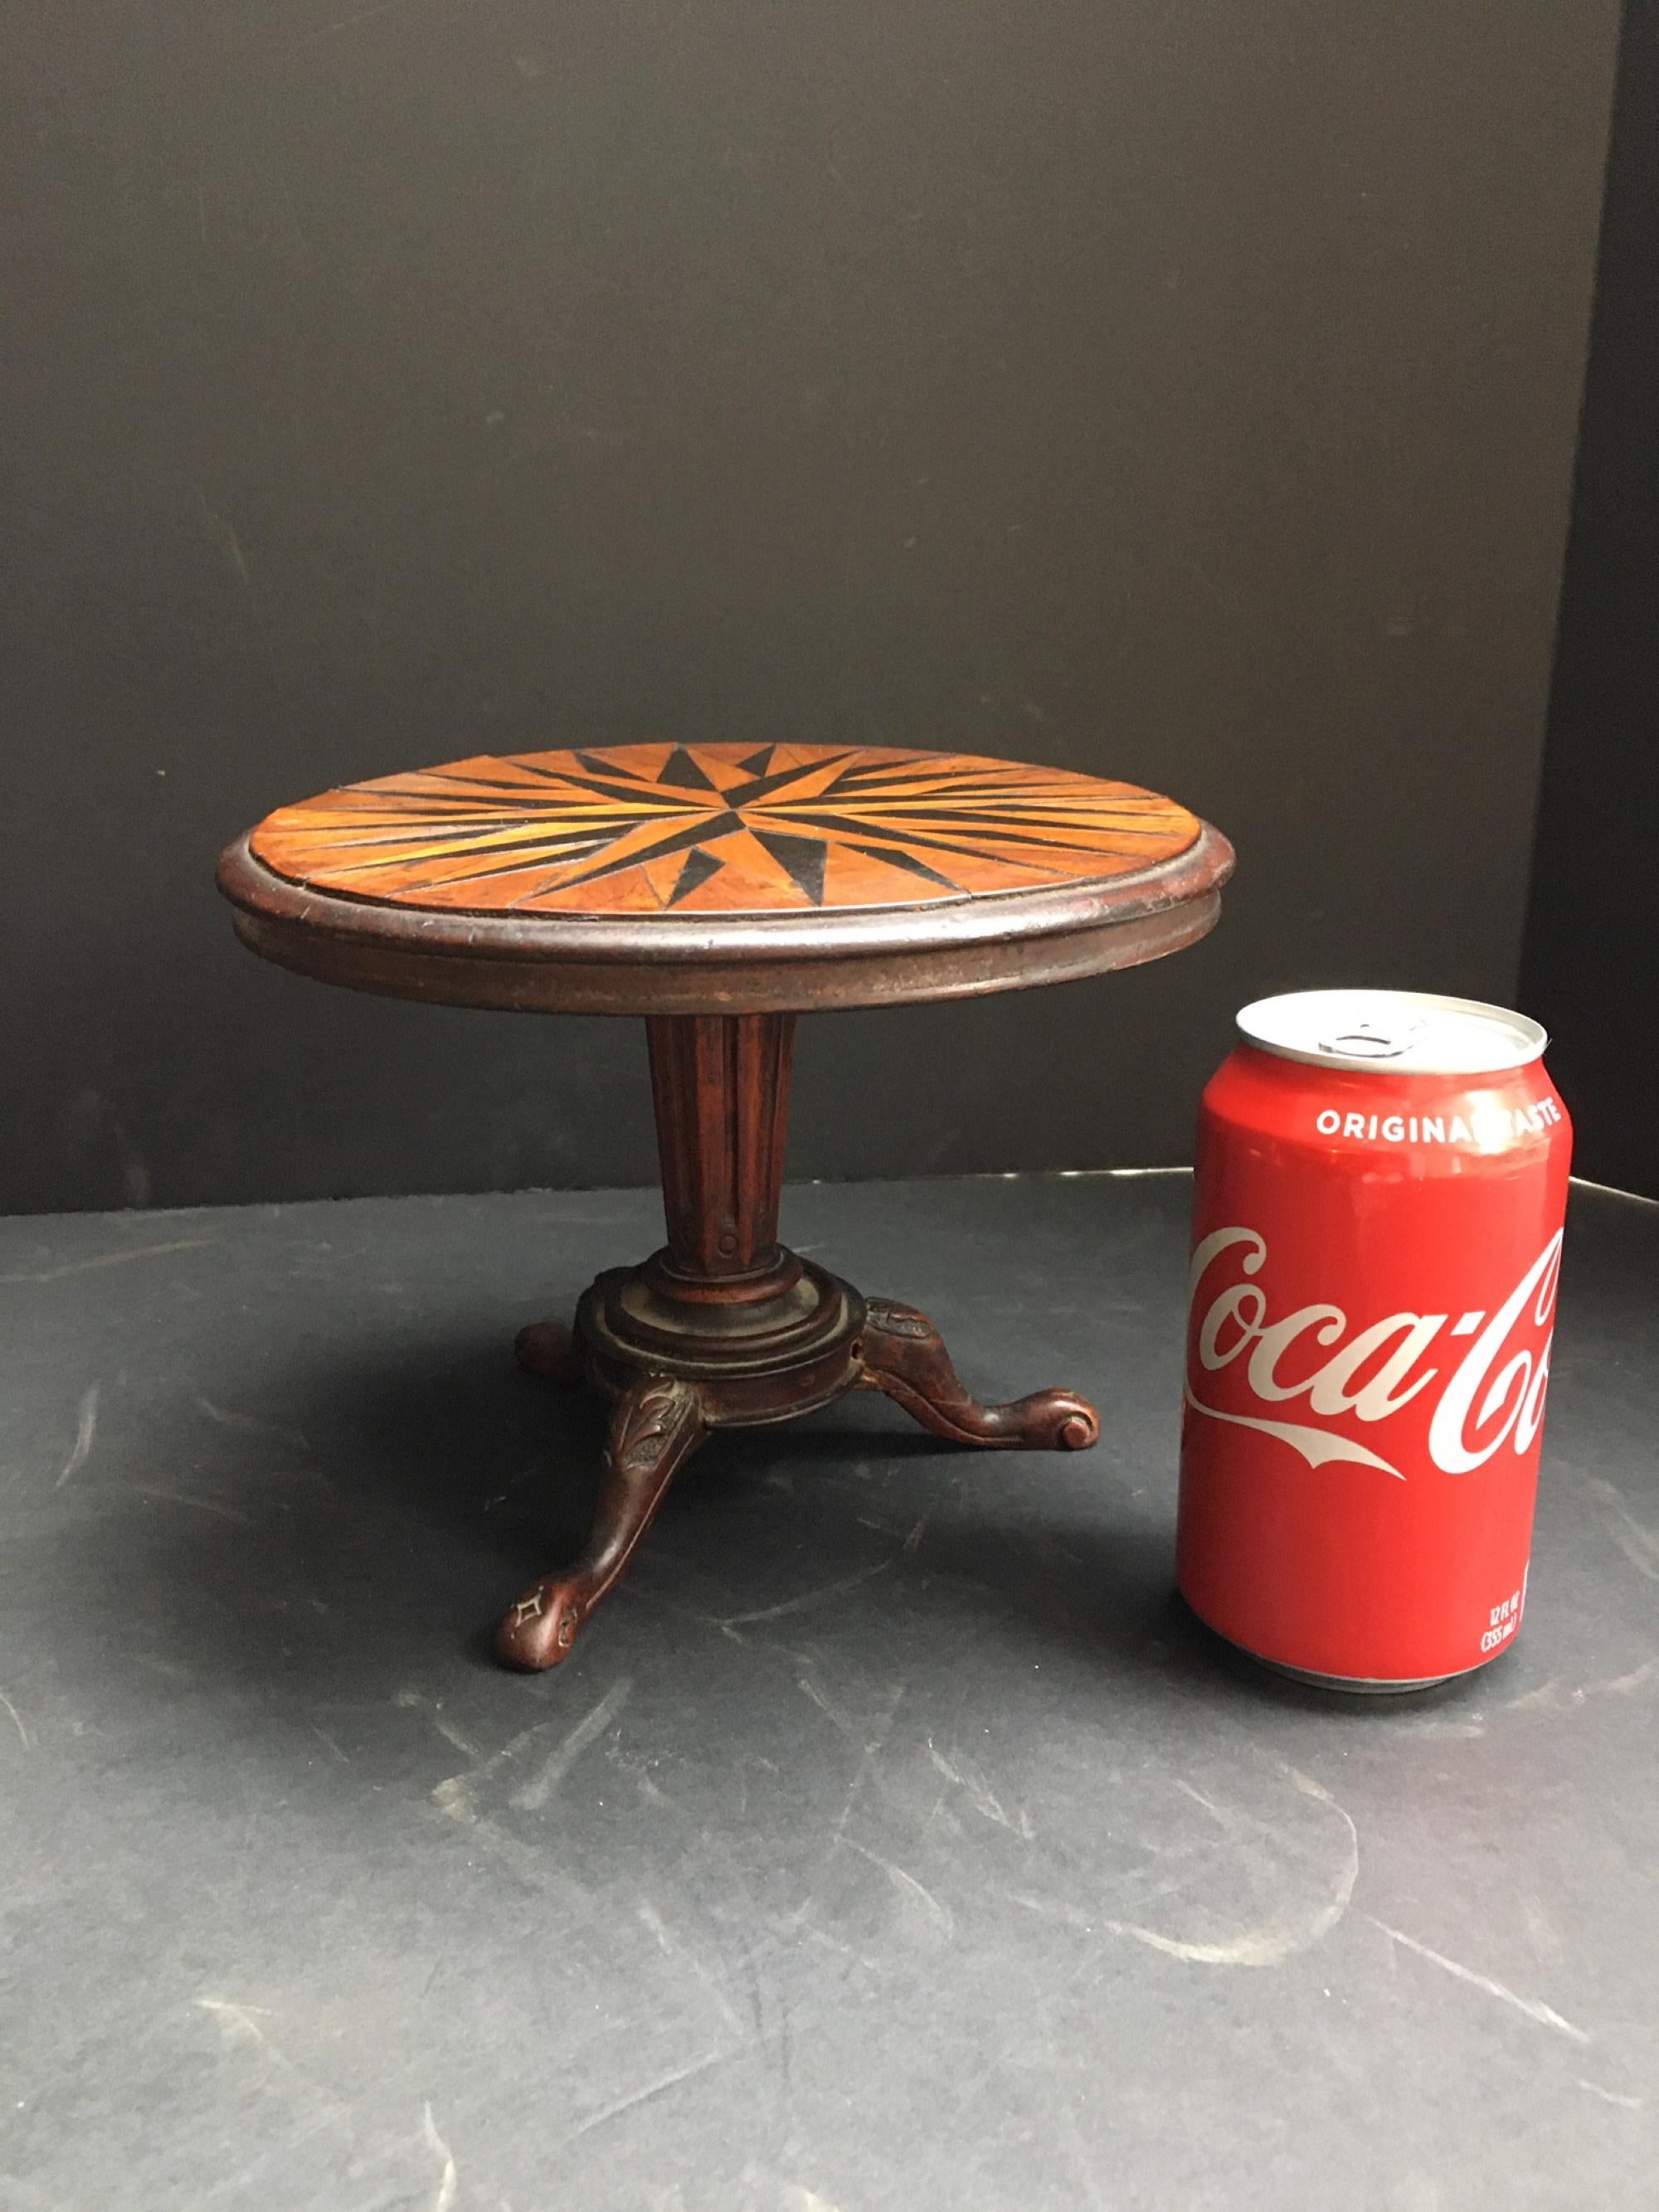 Antique extremely rare miniature marquetry tilt-top table. Probably Ralph Turnbull (1788-1865)

This beautiful little gem from the early 19th century is a ‘tour de force’ of marquetry. It is probably made by the notable cabinet maker Ralph